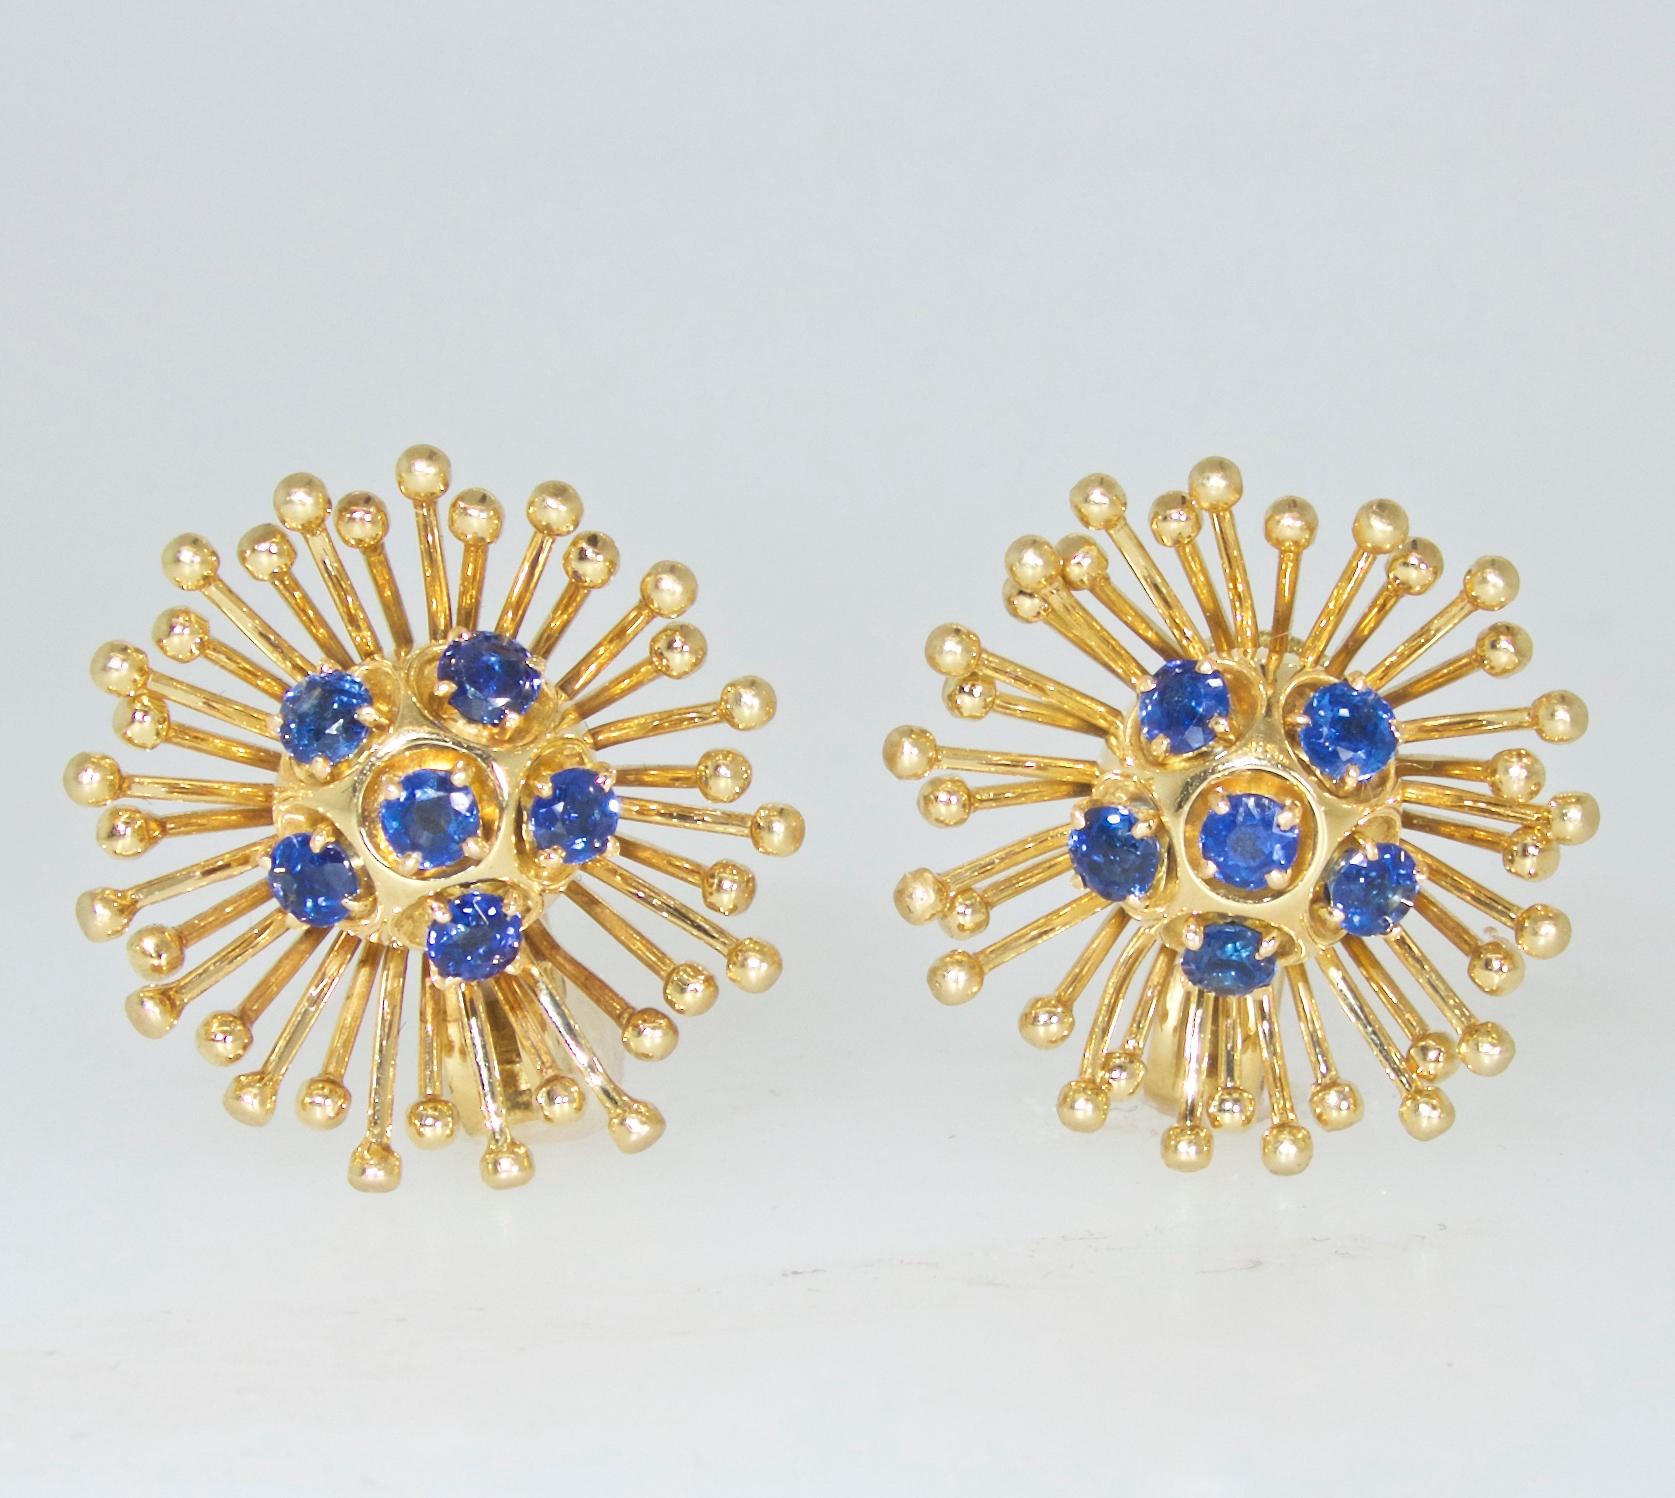 Cartier Retro Style Gold and Sapphire Earrings, circa 1950 2